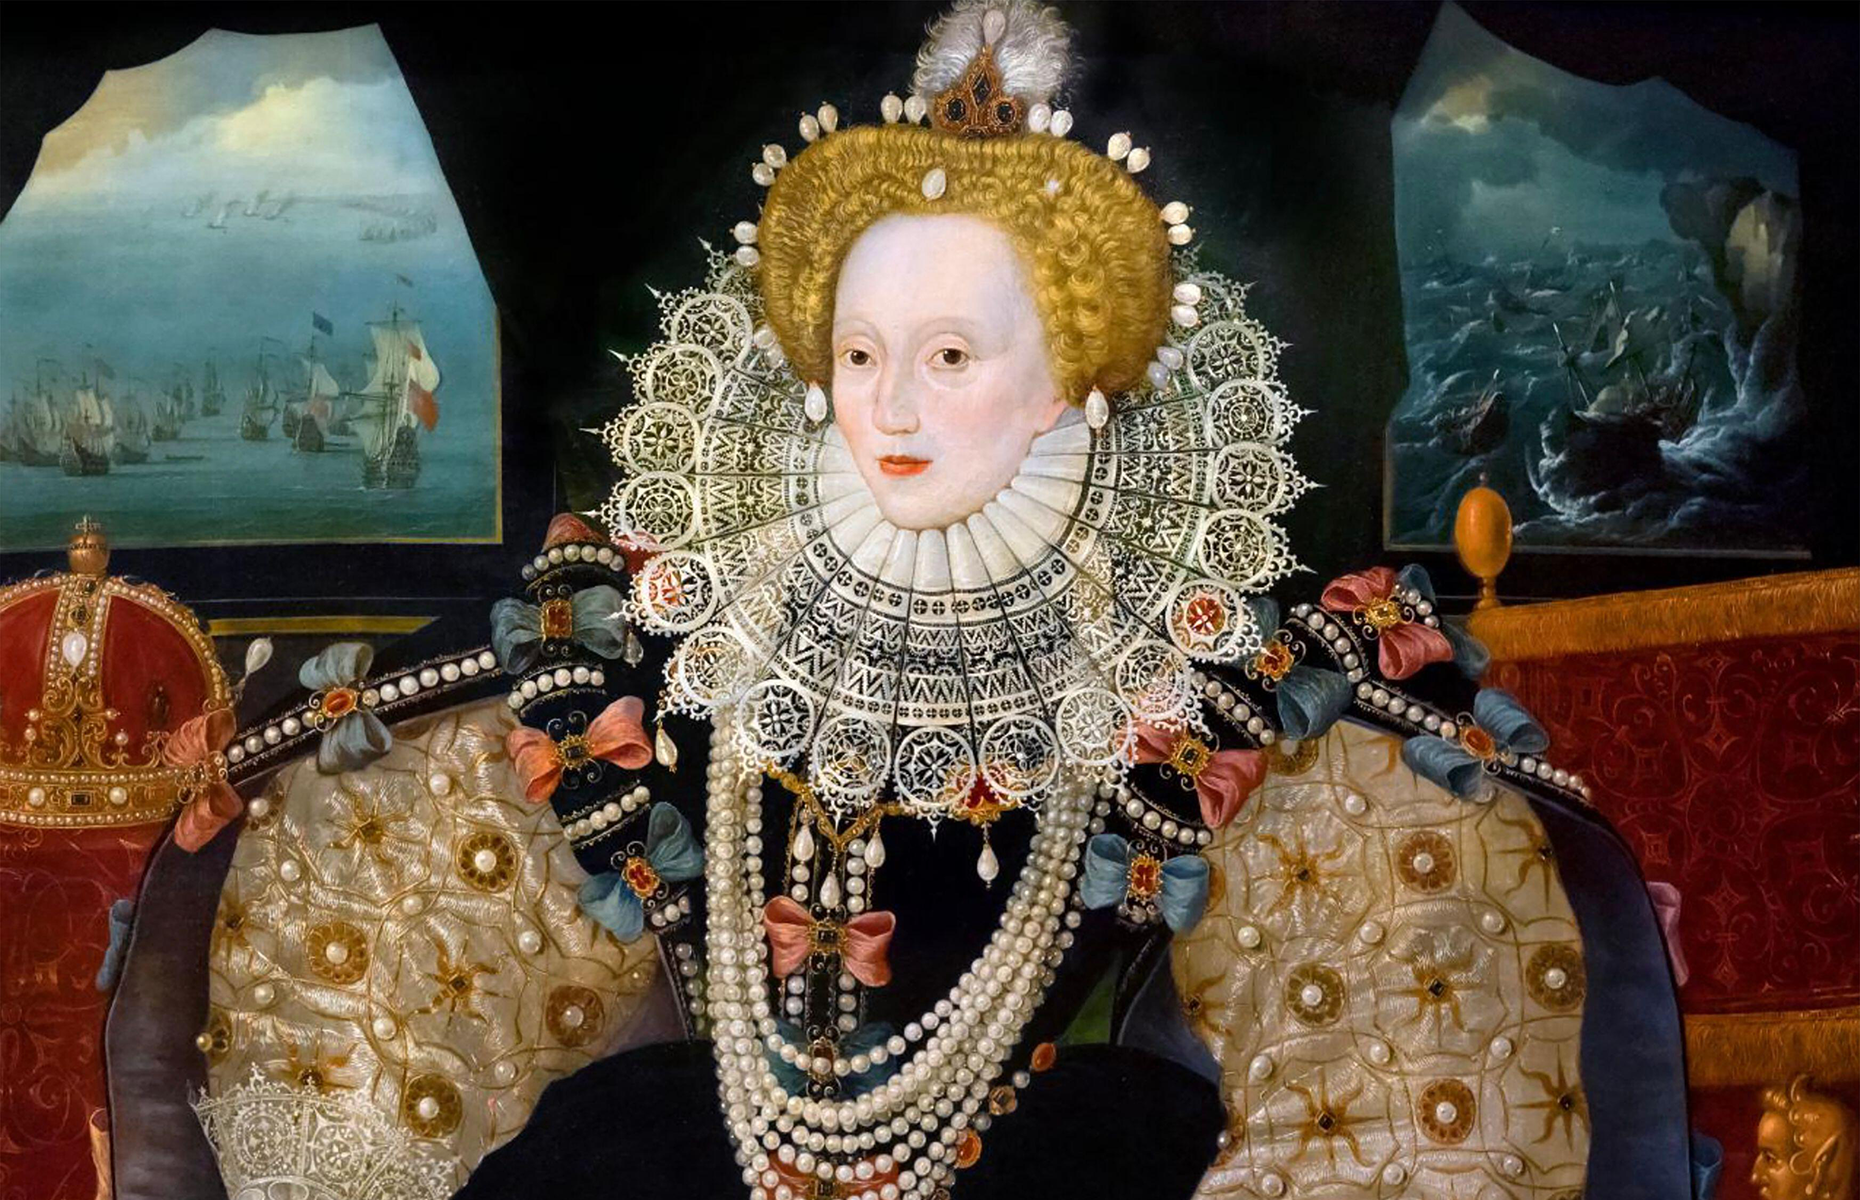 <p>One of Elizabeth I’s most noted strategies as a monarch was her regular ‘<a href="https://www.nationalarchives.gov.uk/education/families/holidays-through-history/tudor/#:~:text=Queen%20Elizabeth%20was%20fond%20of,a%20visit%20from%20the%20Queen.">royal progresses</a>,' essentially tours of the provinces. During these travels, she and her entourage would make extended visits to the various stately homes of favoured members of her court.</p>  <p>It was meant to make the queen appear to be an accessible, tangible figure to her subjects, as well as being acts of political favour bestowed upon the courtiers whose homes she deigned to visit. Cecil was therefore hopeful that she would come to Burghley, showing everyone how important he was in her eyes. But this never came to pass...</p>